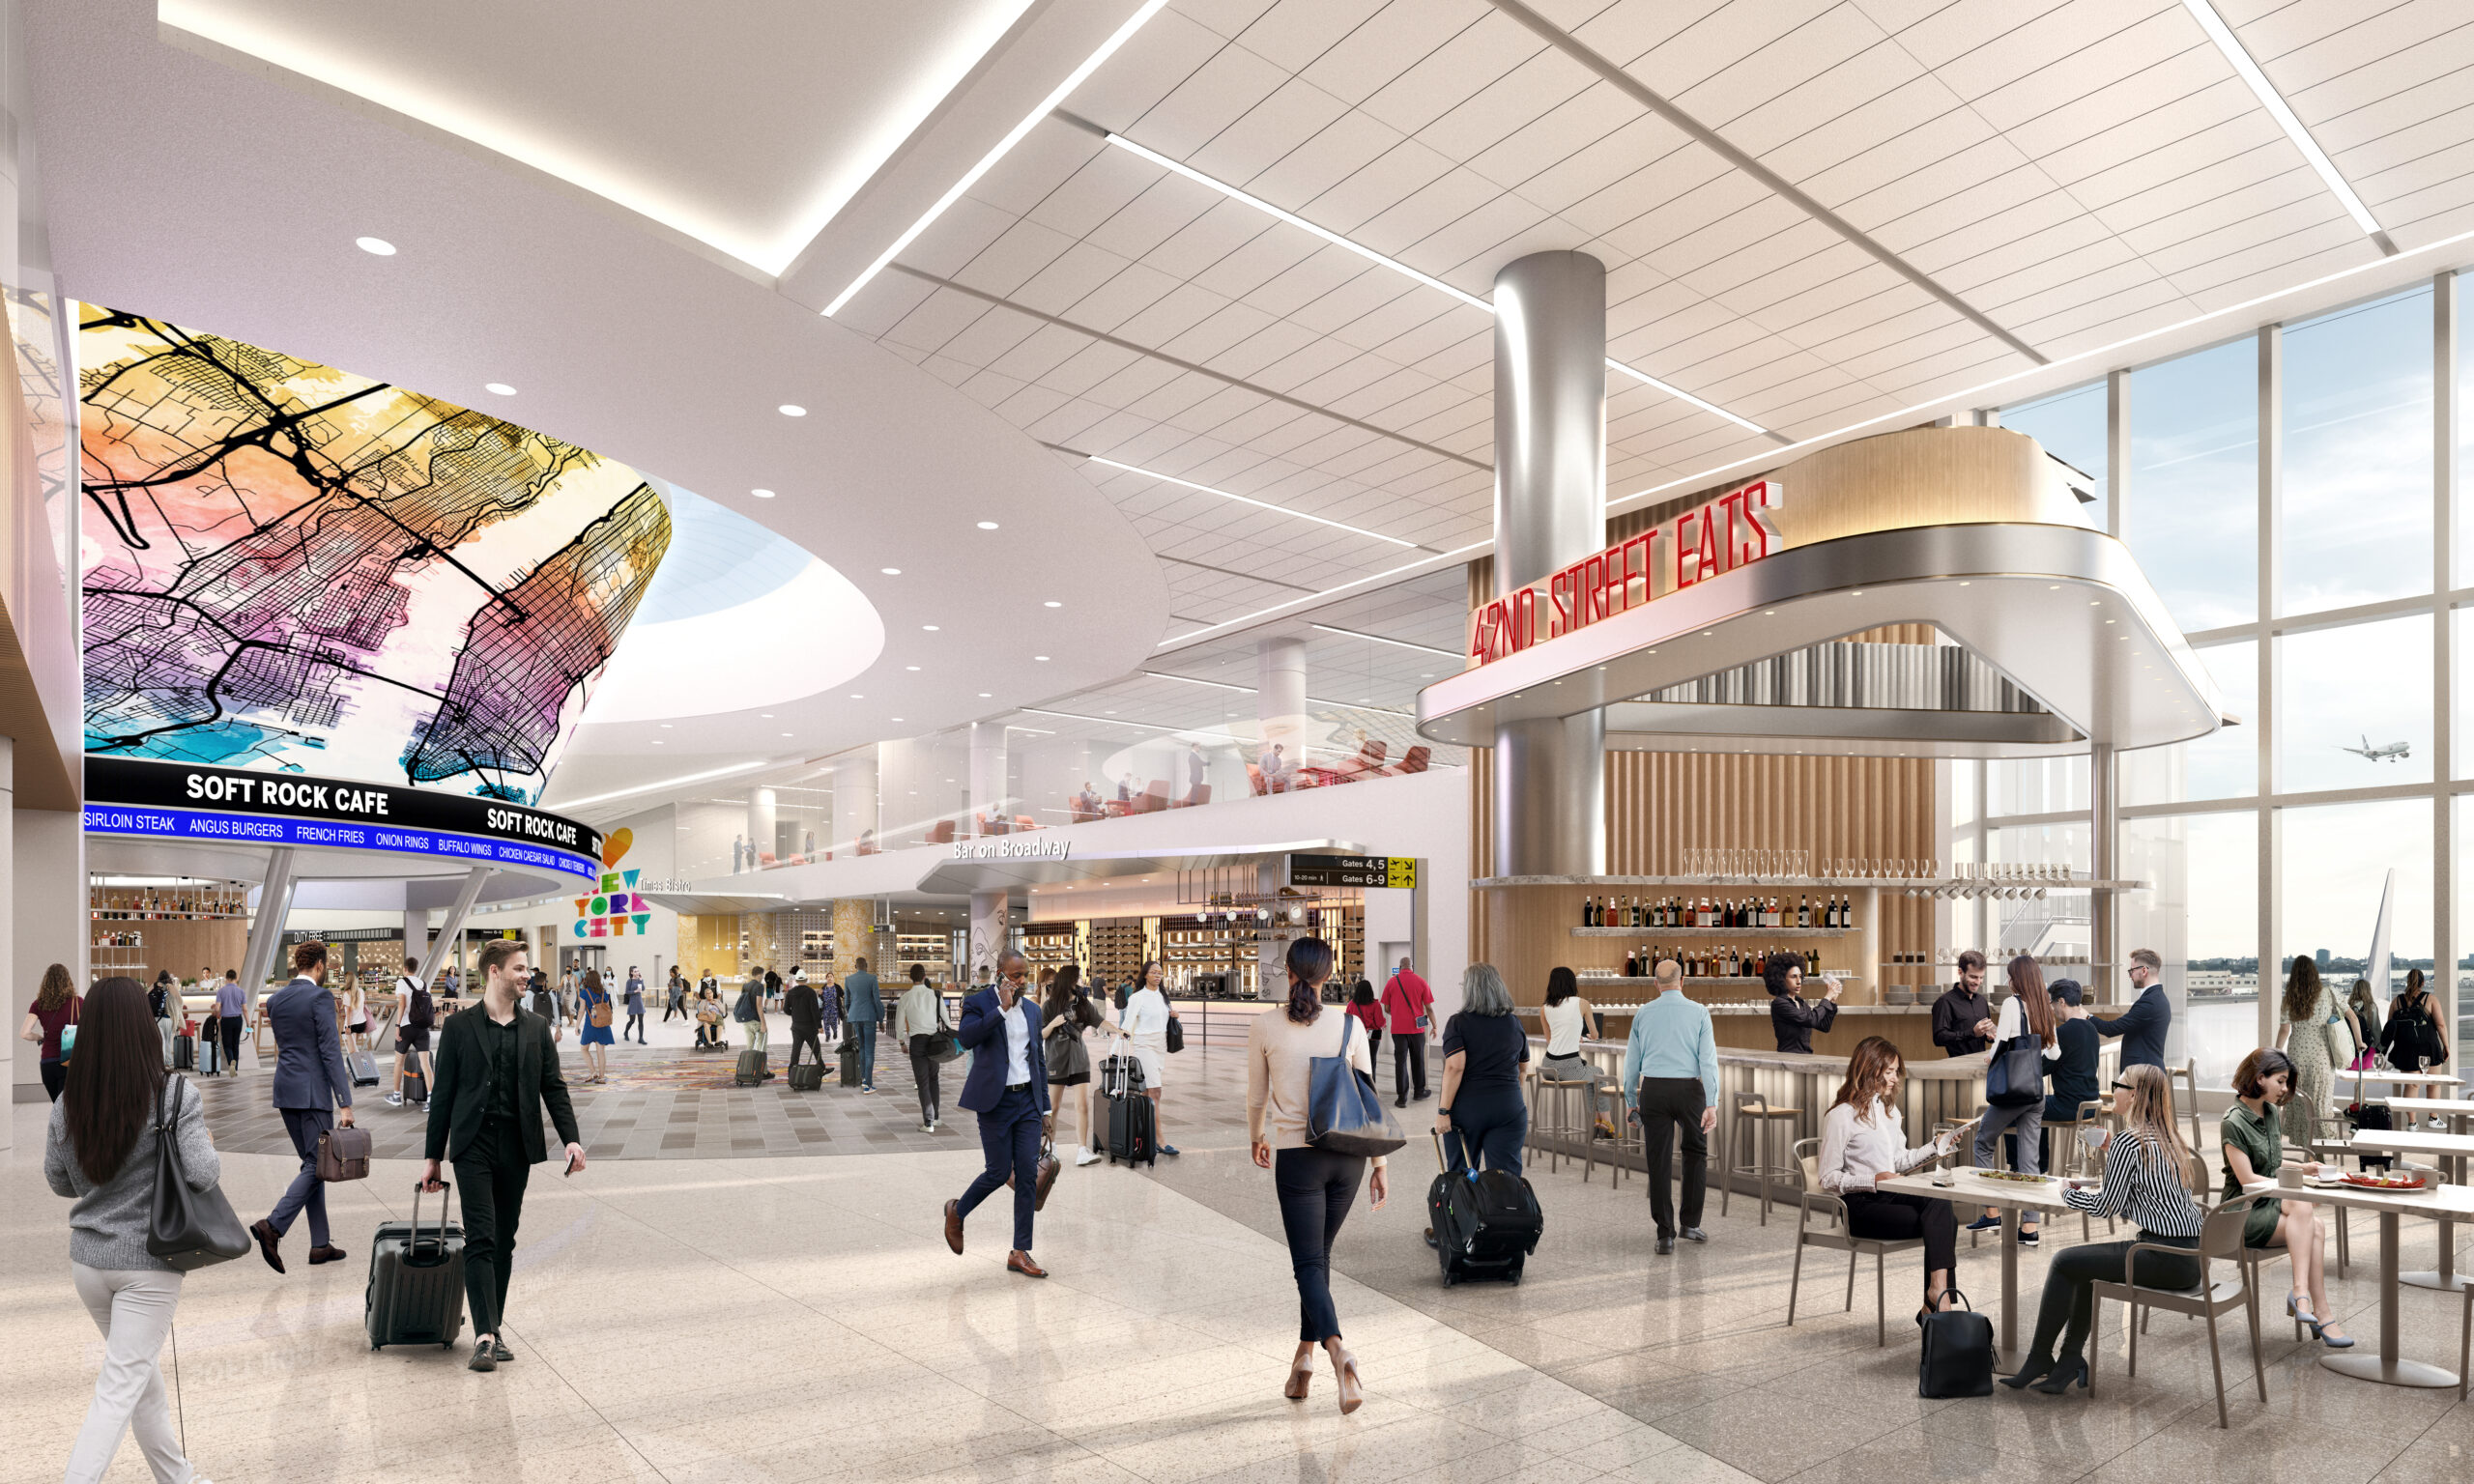 The new terminal will be home to New York City-inspired retail, dining options